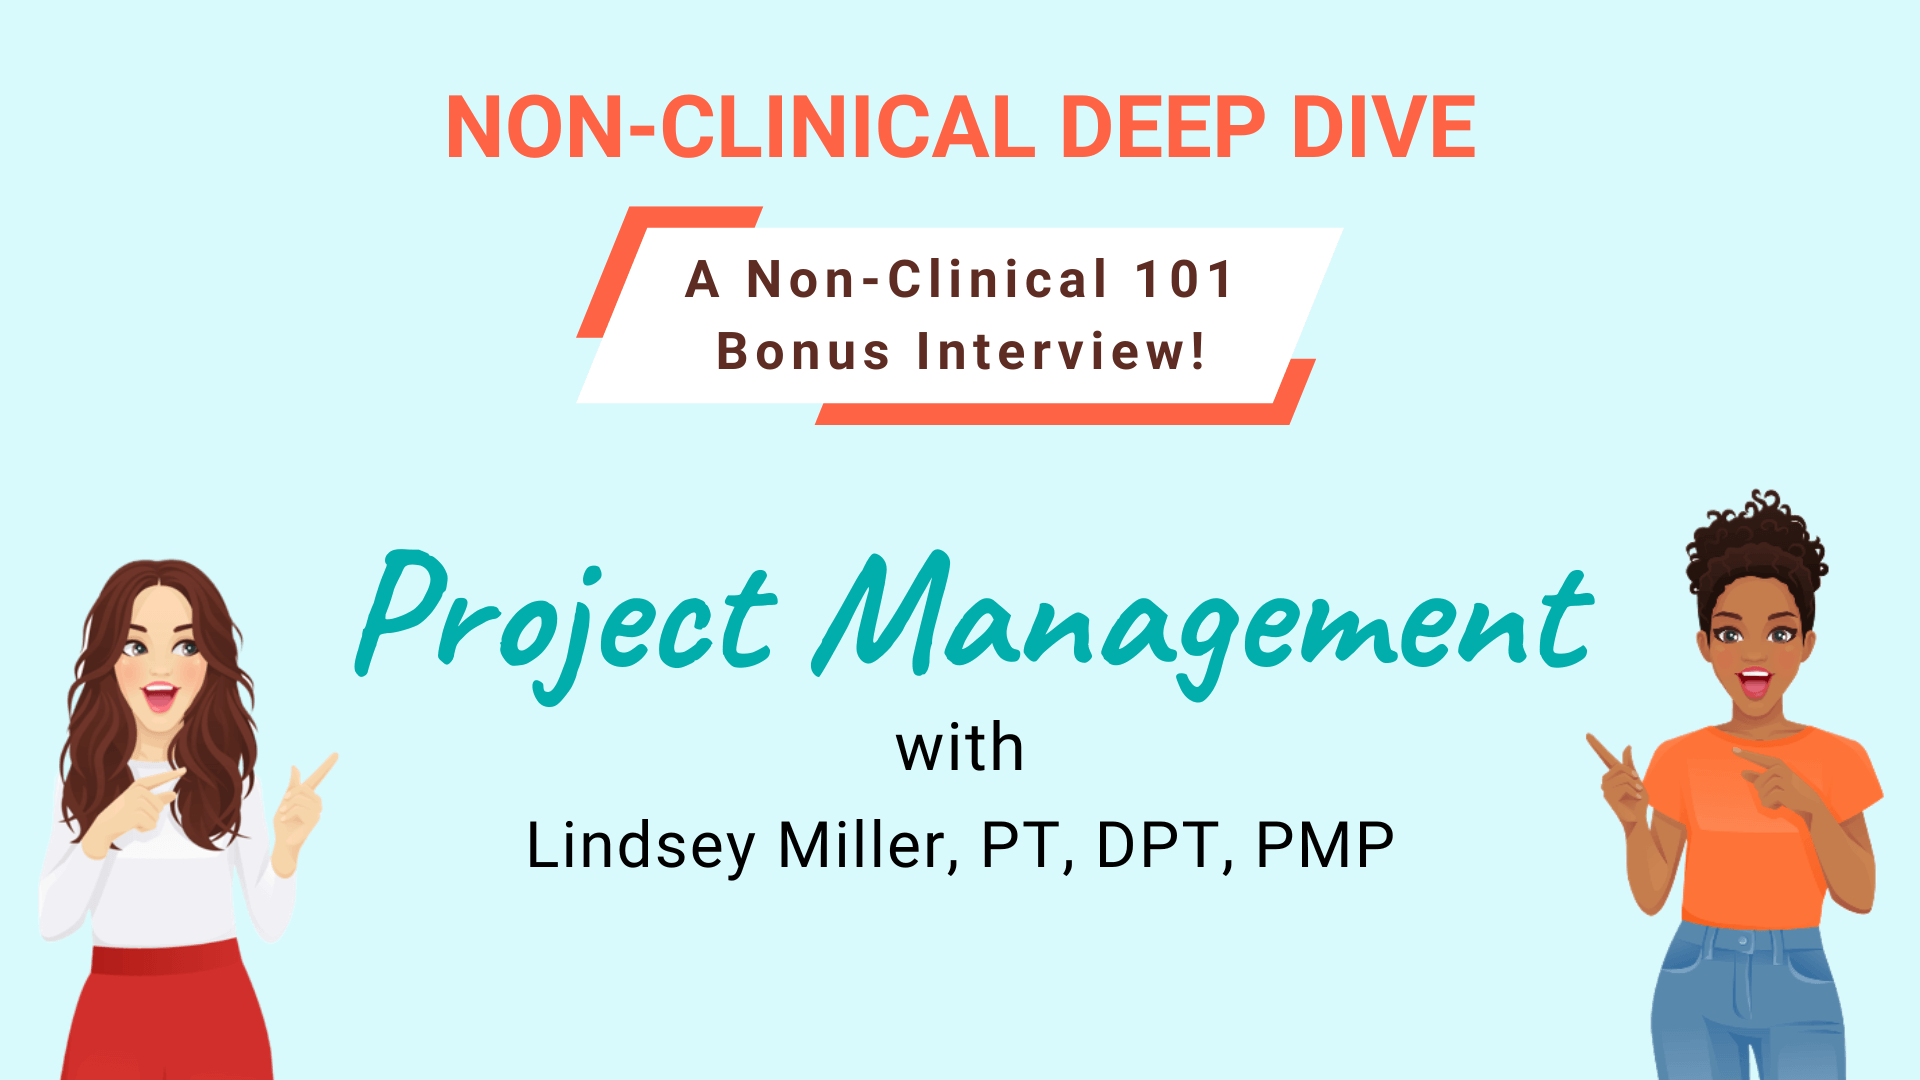 A non-clinical 101 bonus interview with Lindsey Miller, PT, DPT, PMP, on Project Management, is available in Non-Clinical 101!